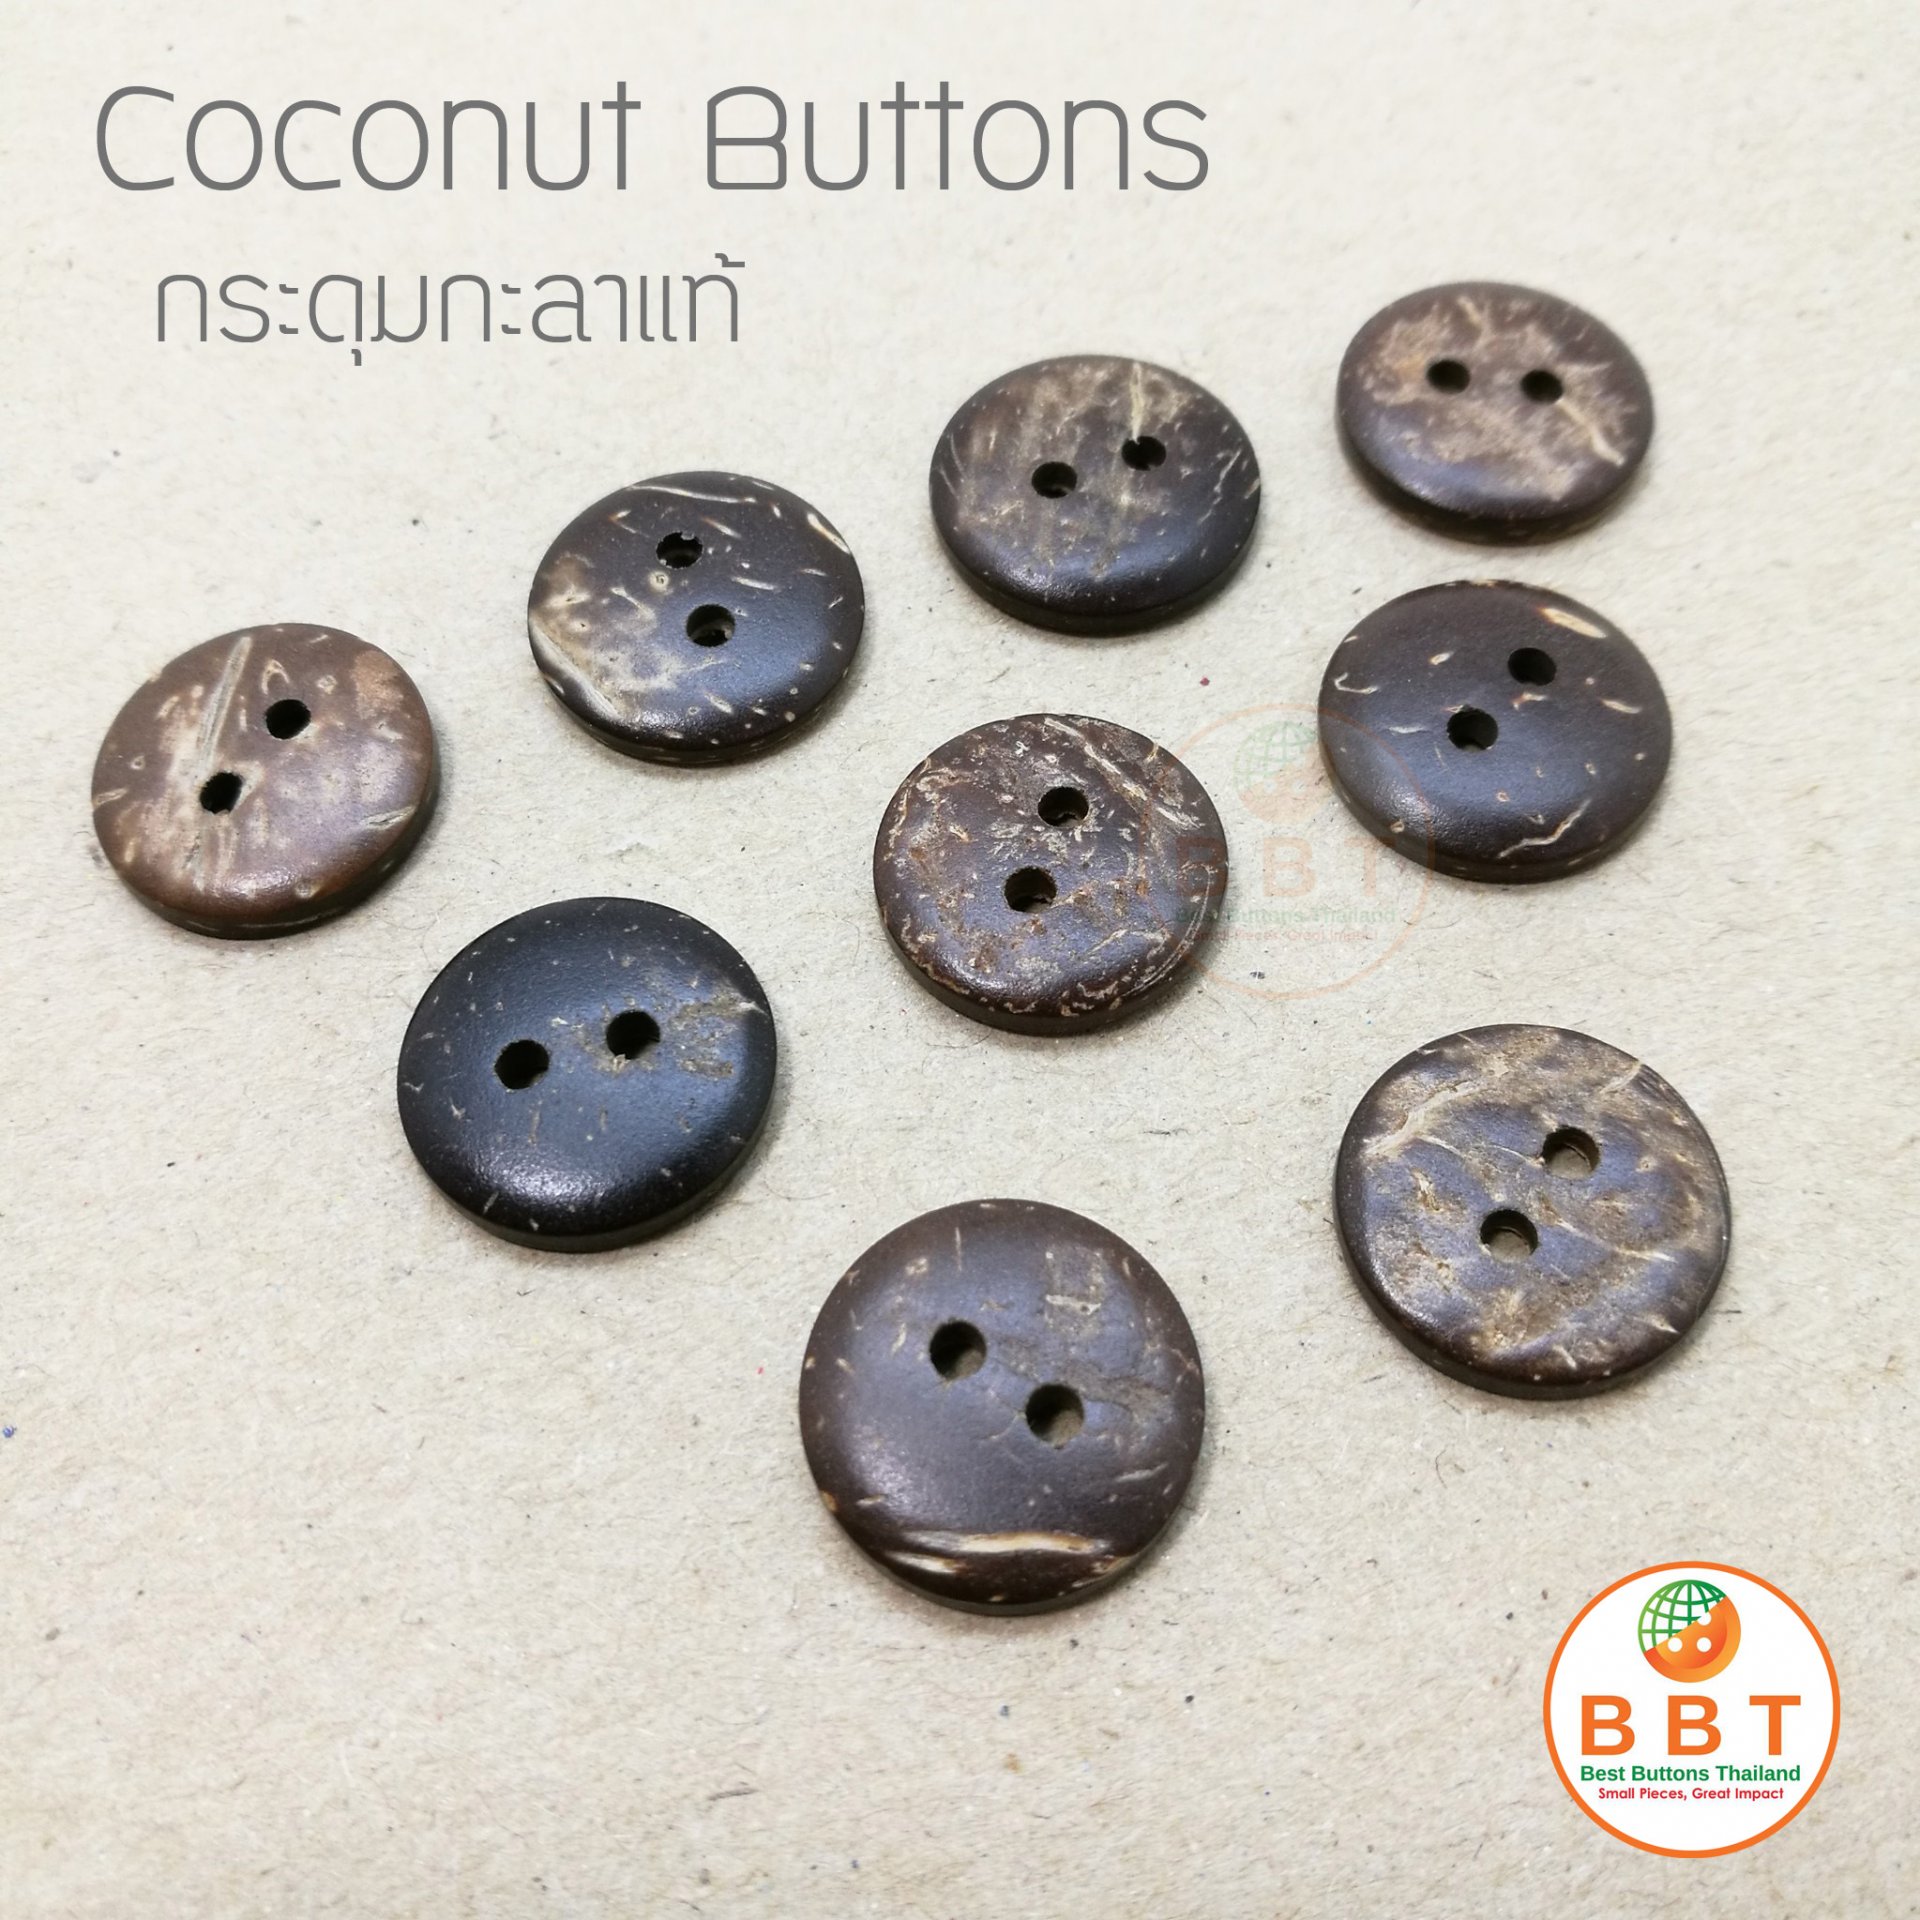 Coconut Buttons Size 15mm.